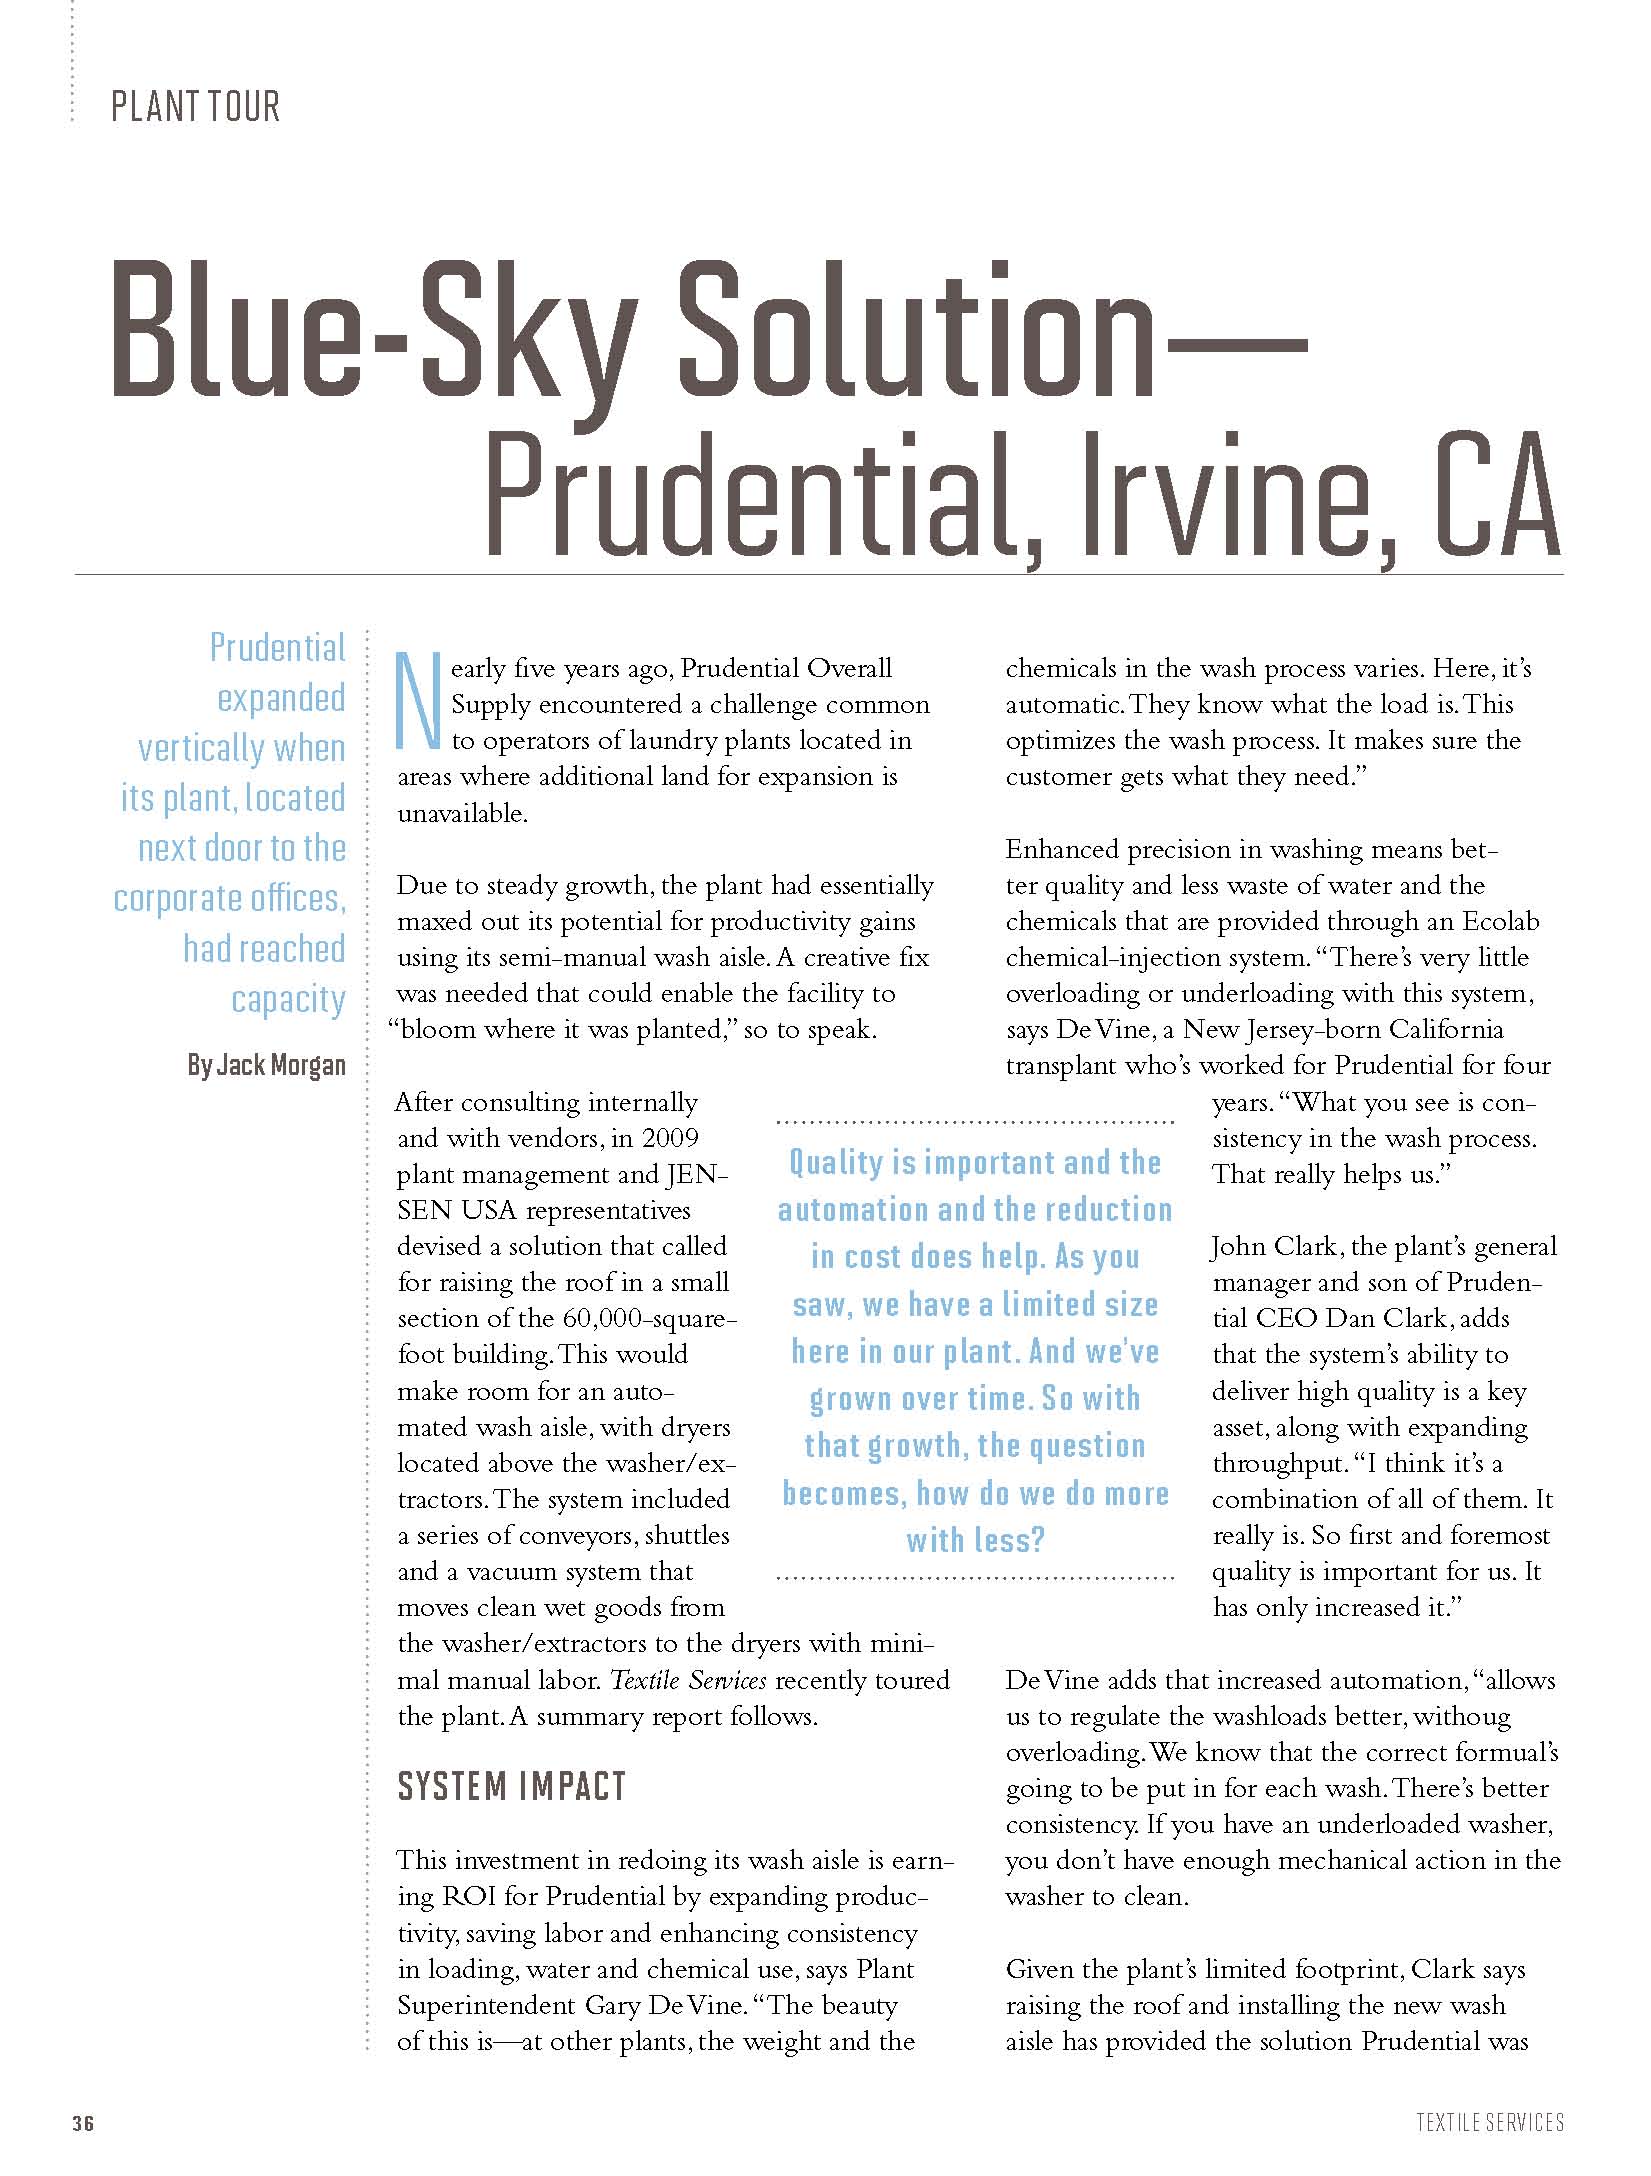 Blue-Sky Solution - TRSA Article Featuring the Irvine Plant